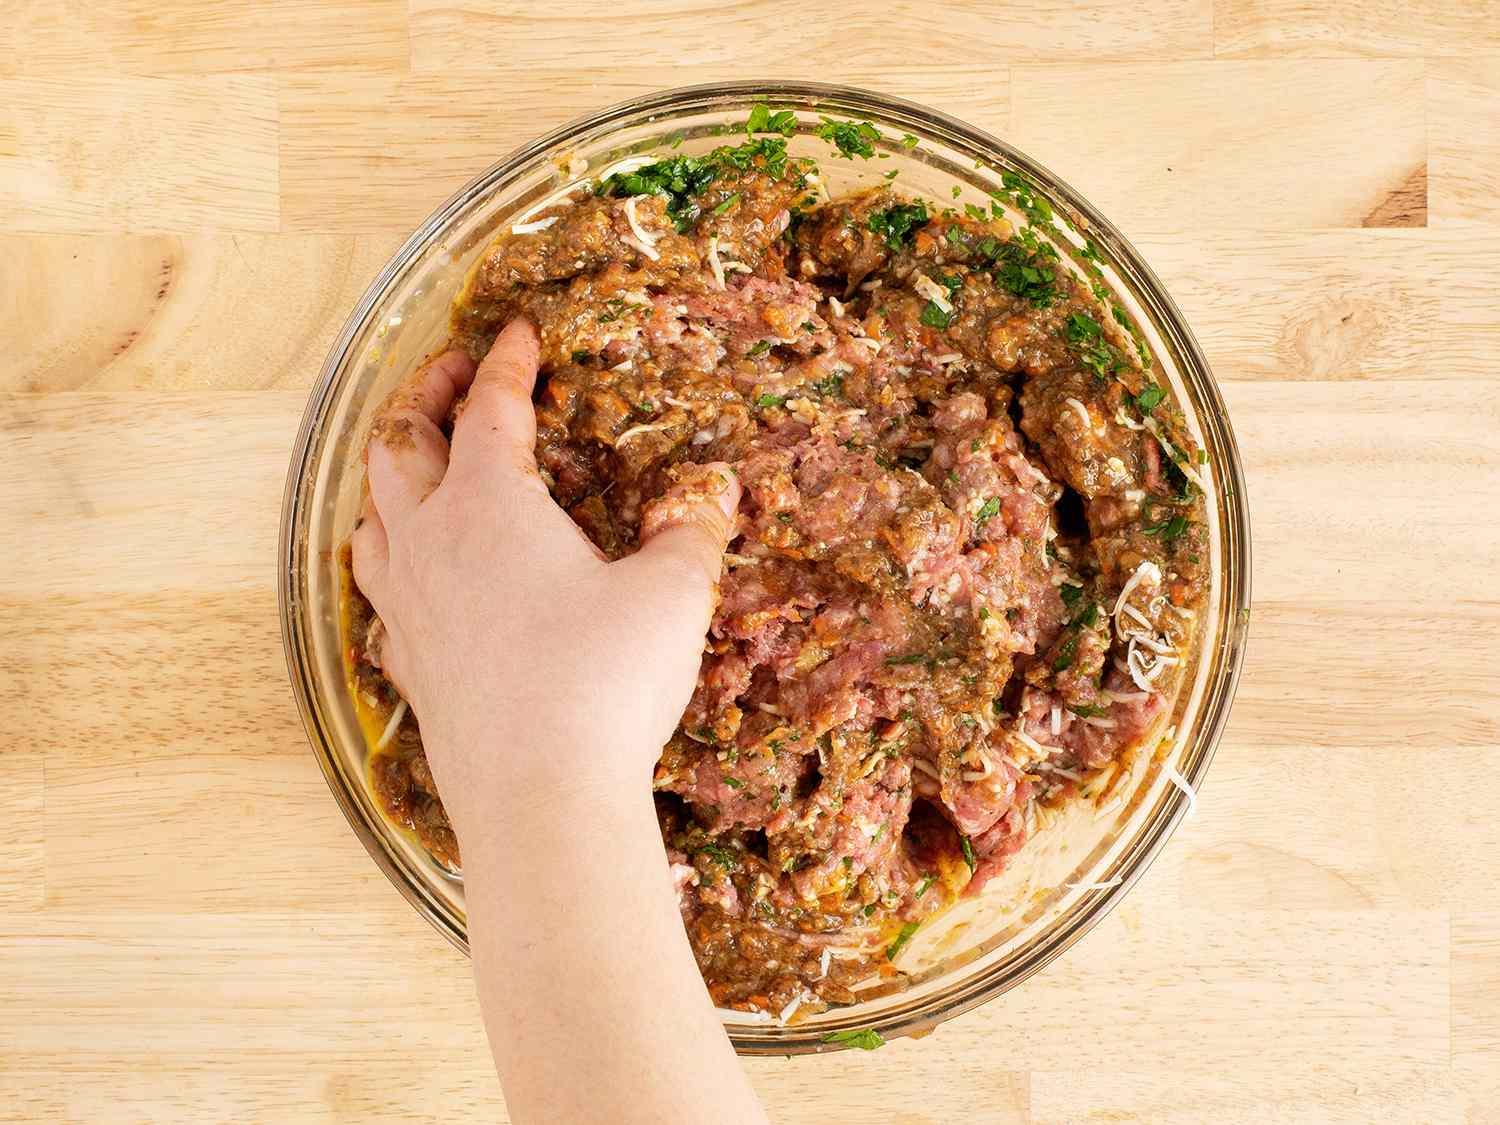 Hand mixing meatloaf mixture in a bowl